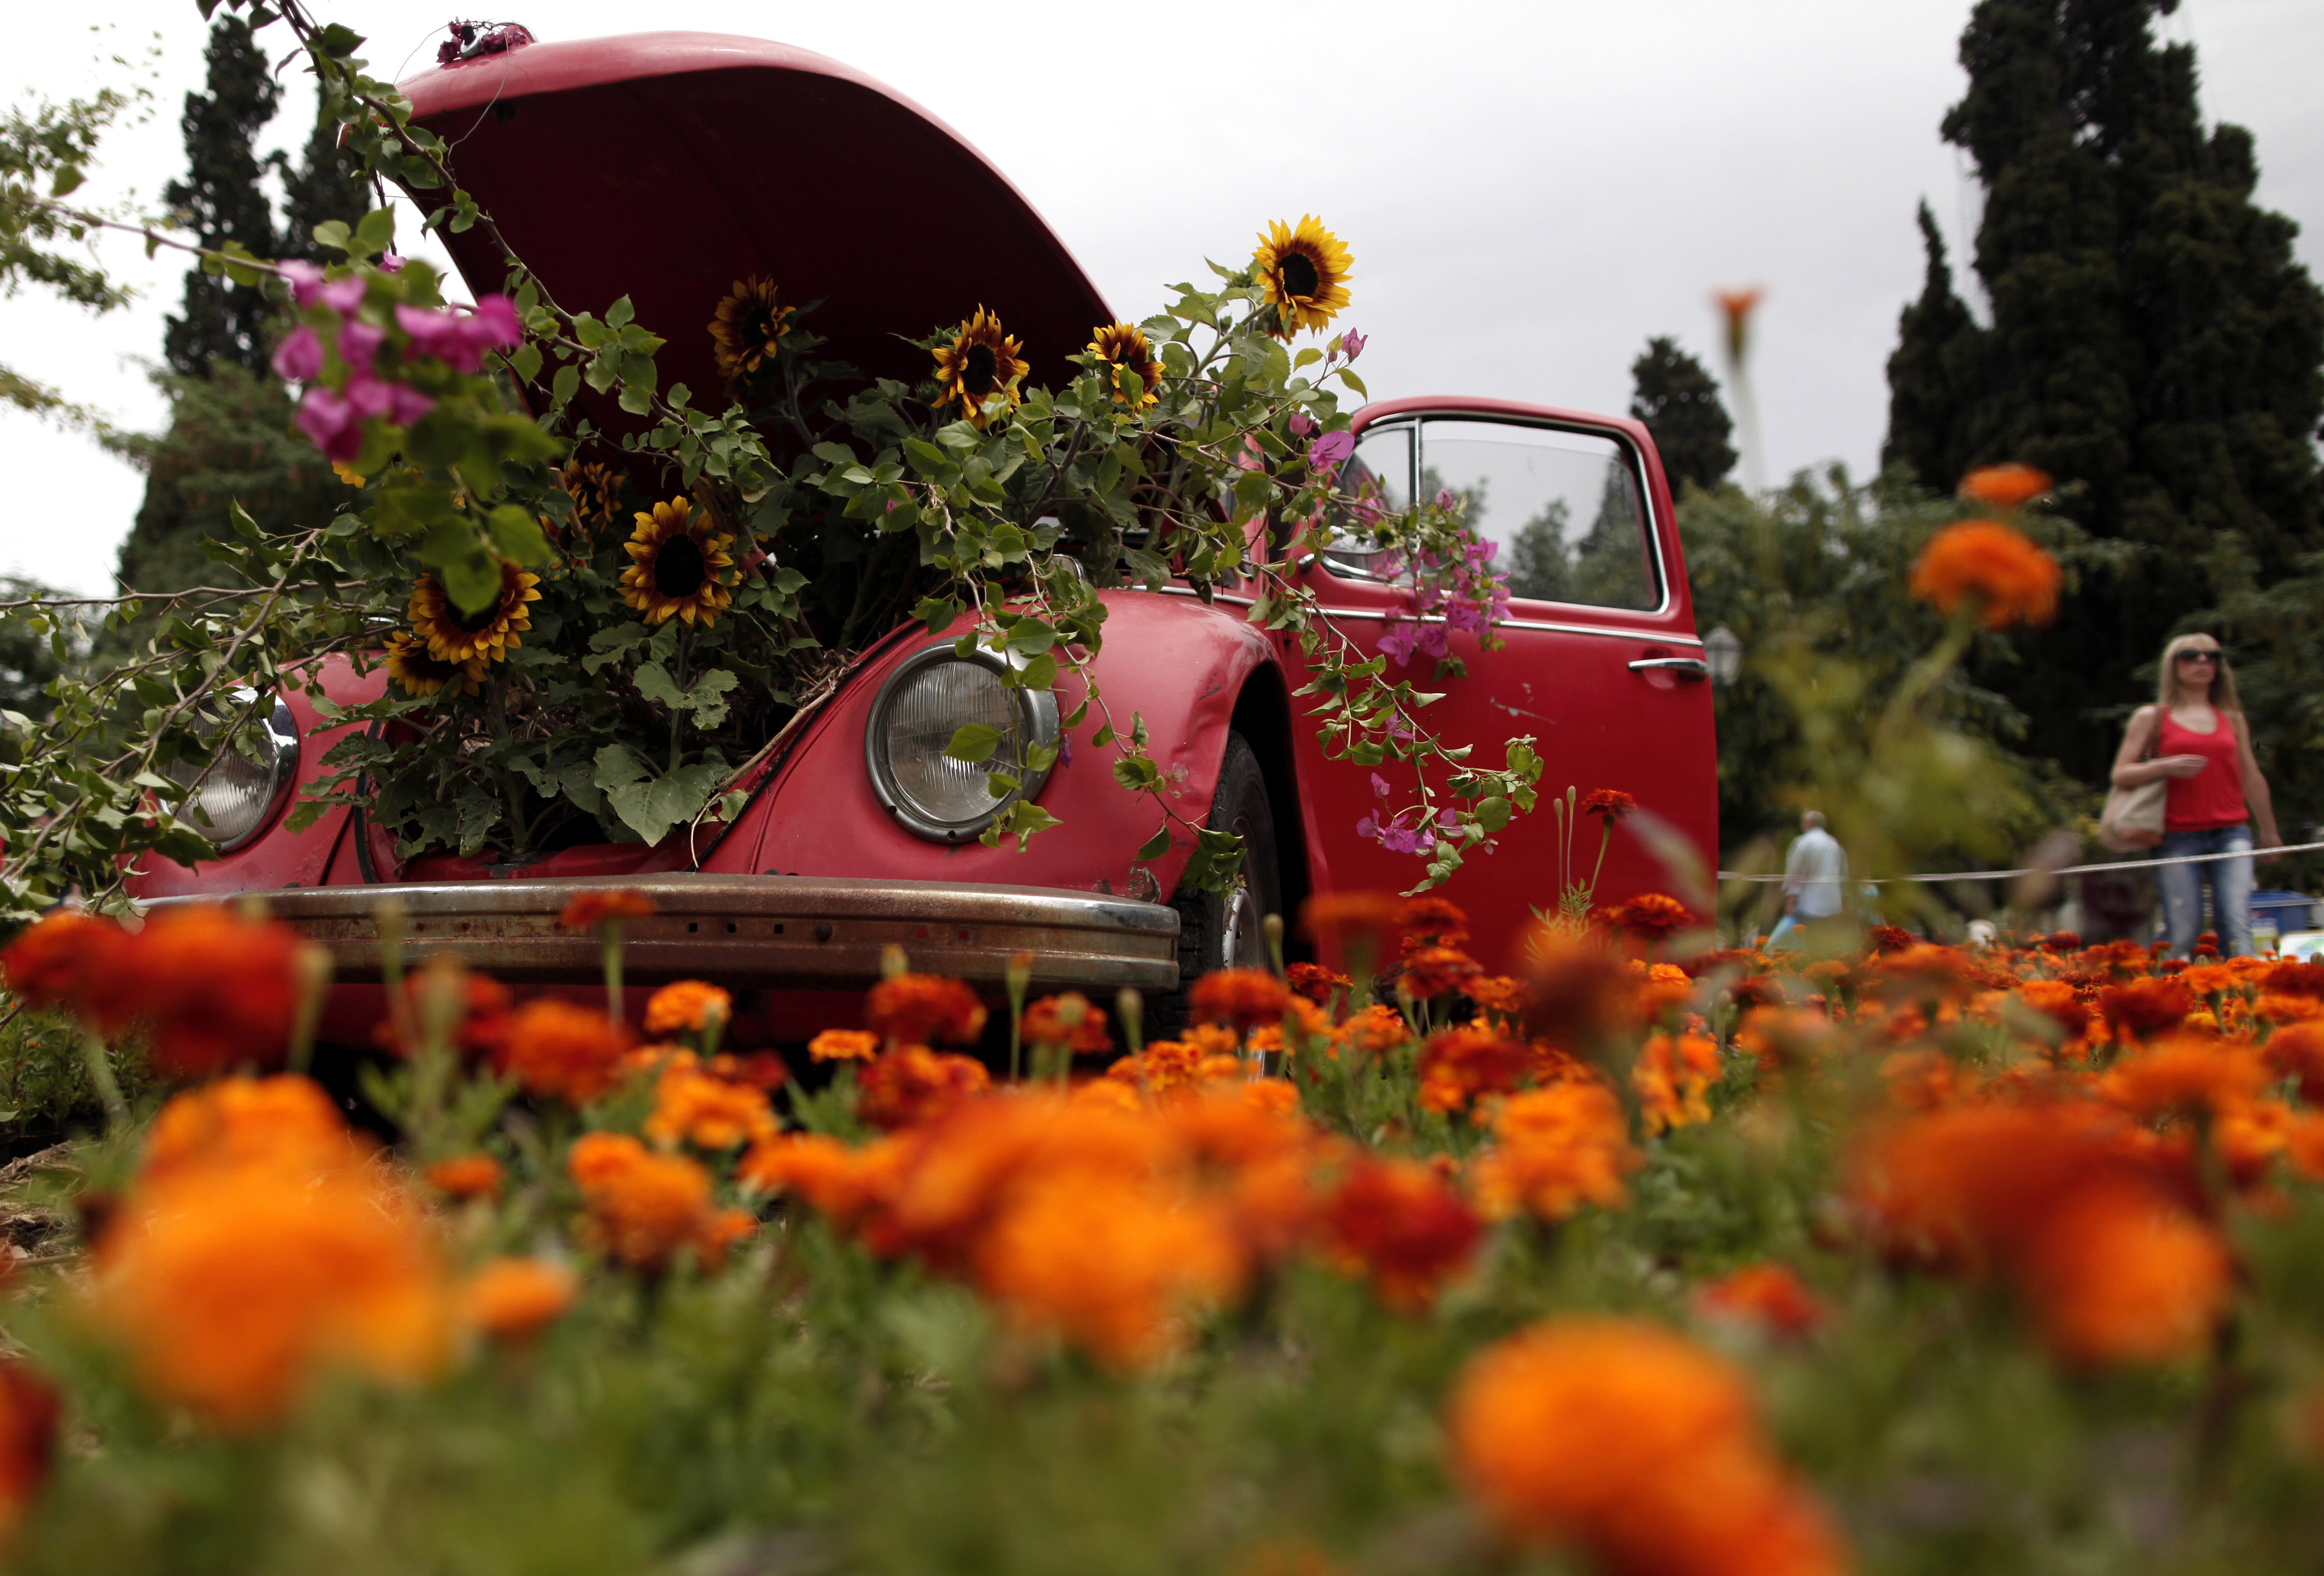  In this June 7, 2013, file photo potted sunflowers push out of the bonnet of an old Volkswagen Beetle surrounded by flowers in Athens' central Syntagma Square. Photo: Petros Giannakouris / AP